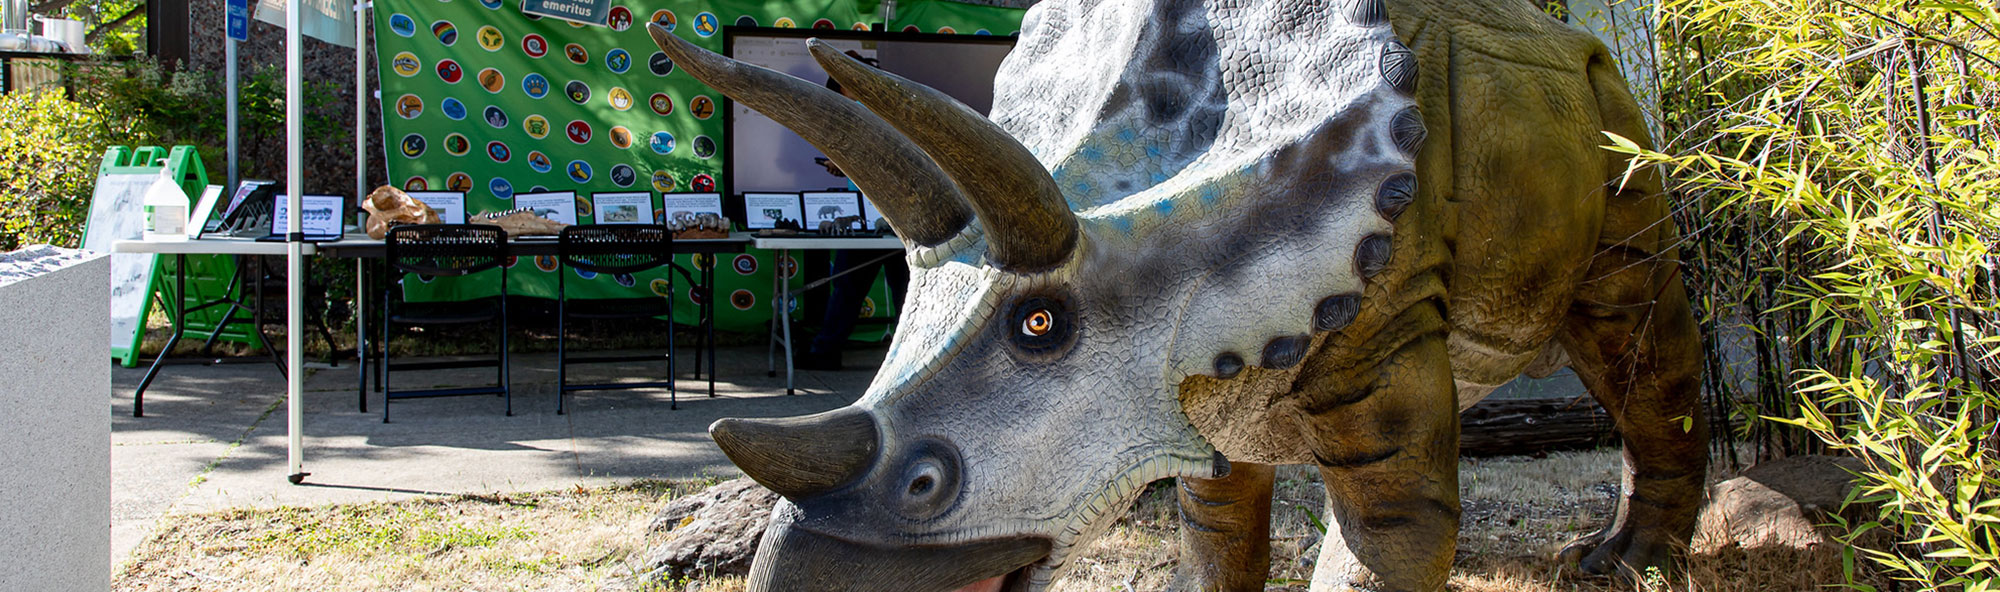 Triceratops statue in front of tent at Dino day event.